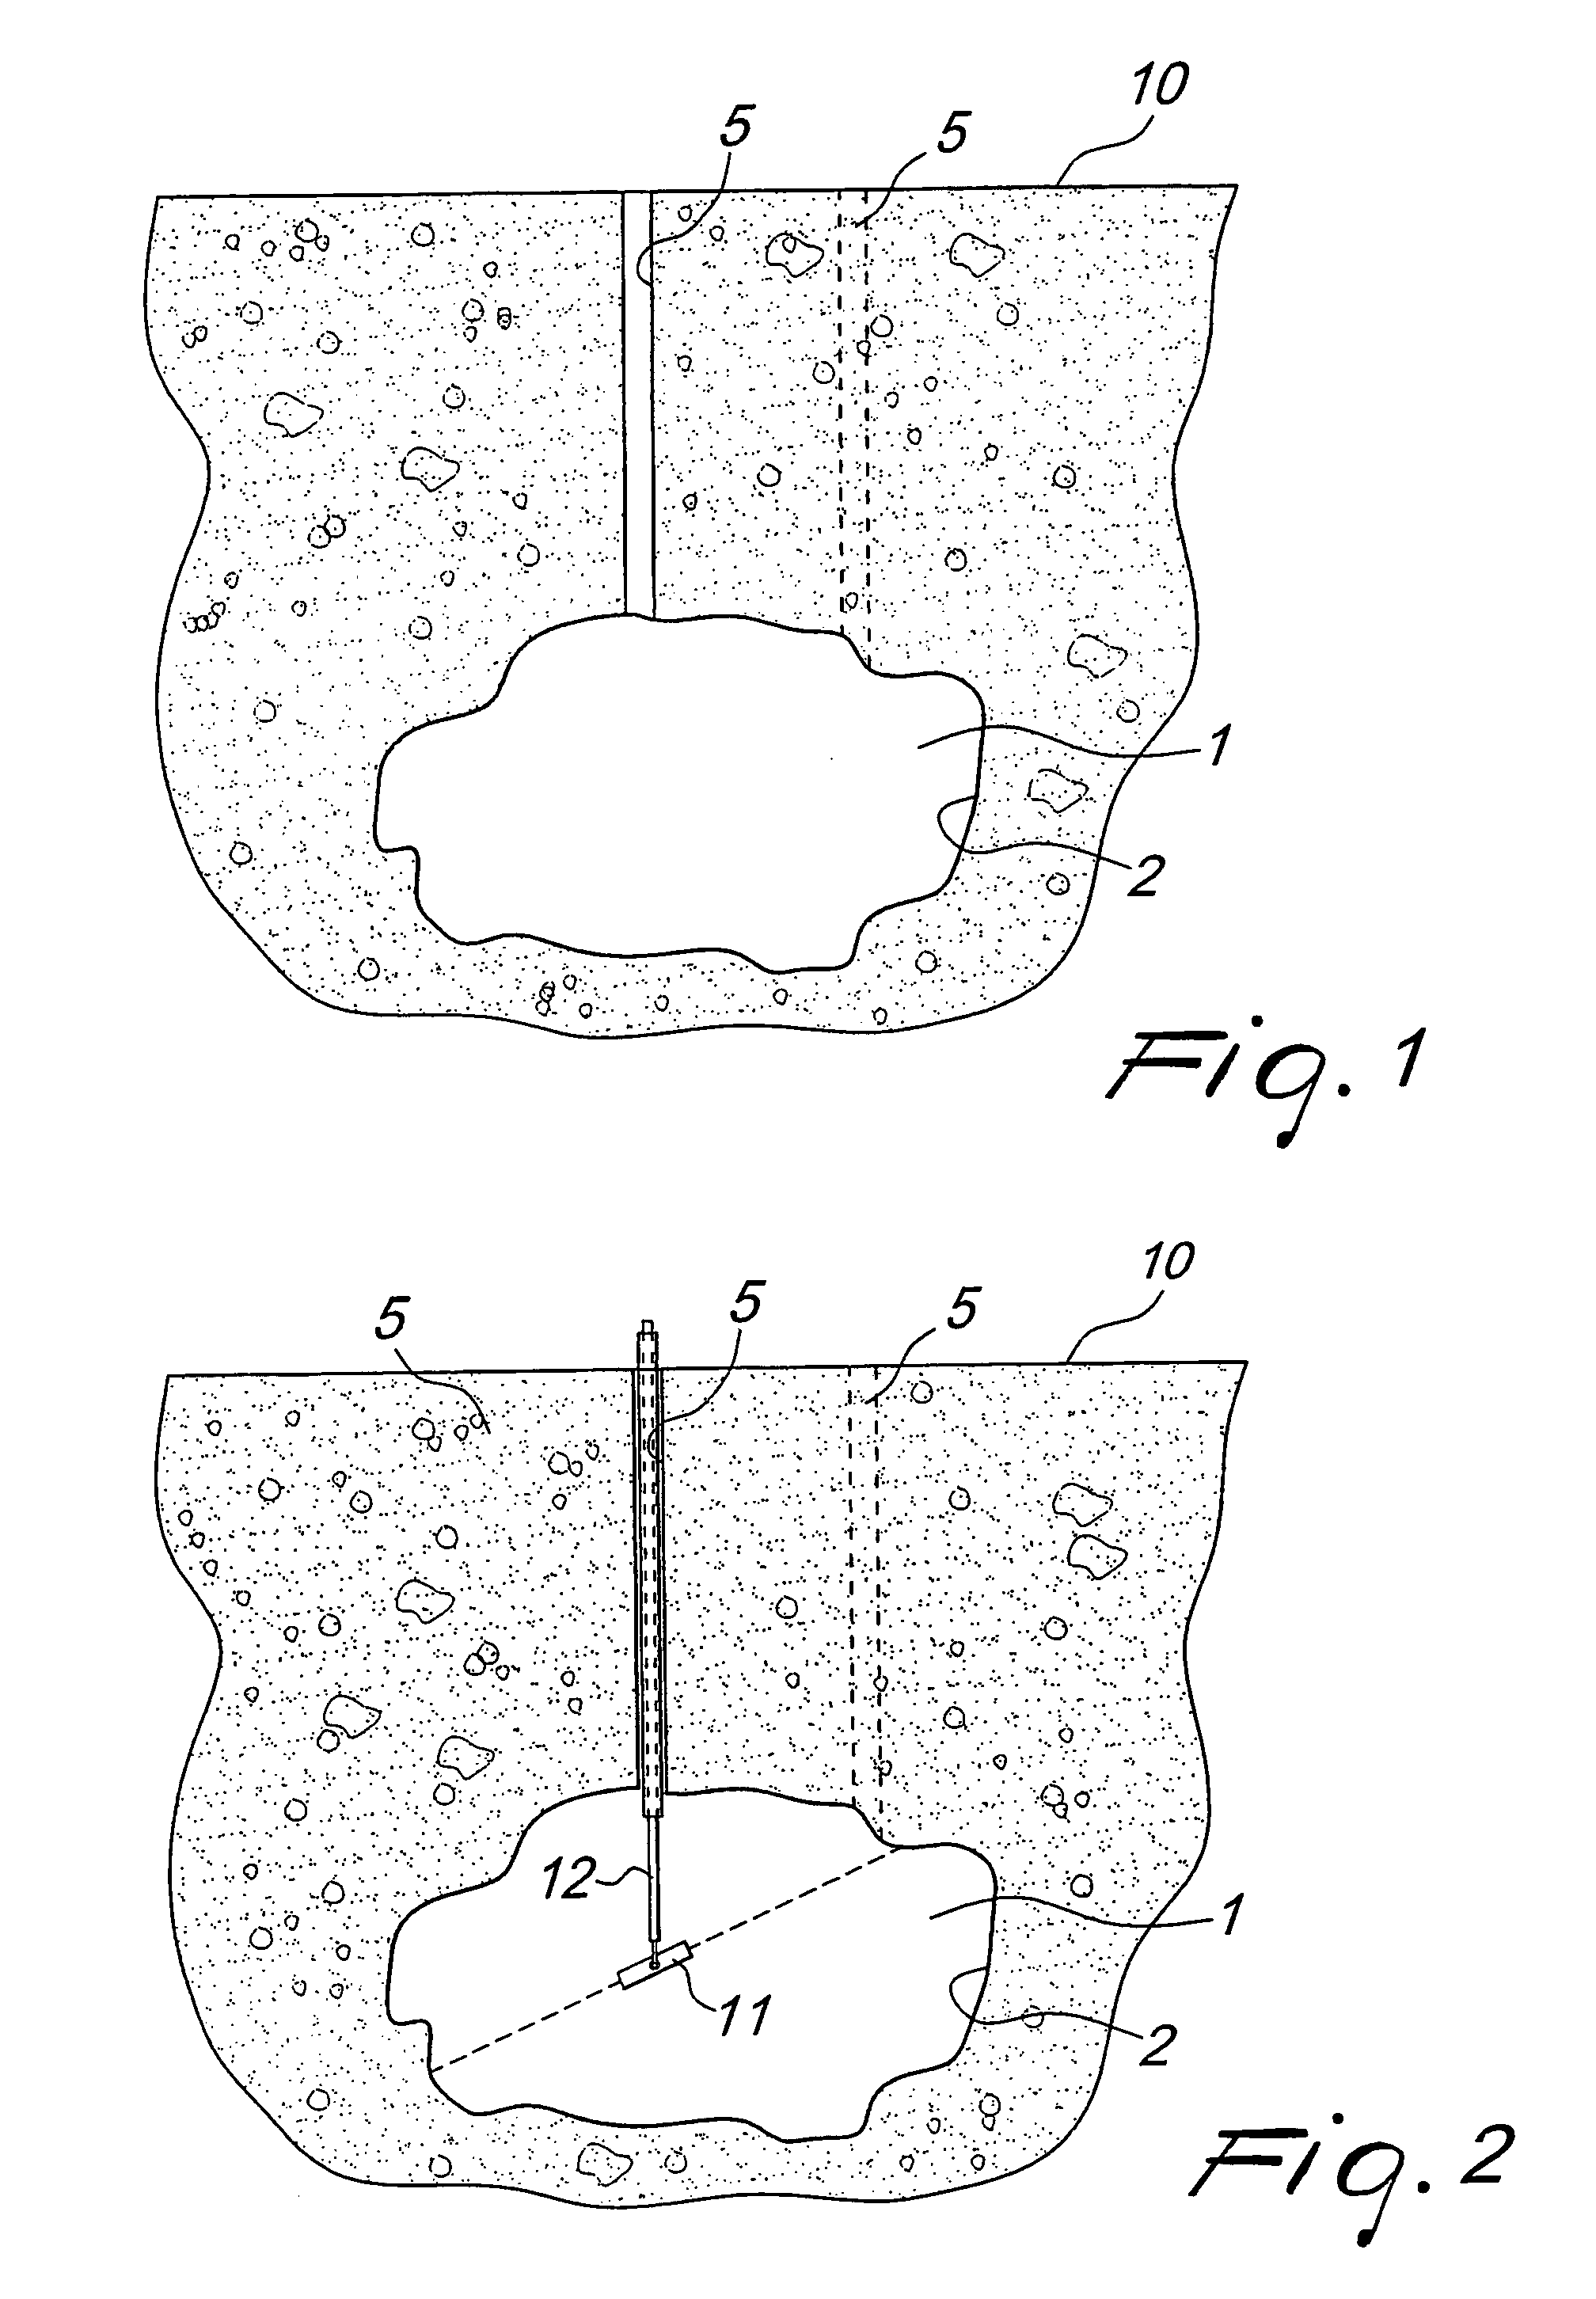 Method for saturating cavities present in a mass of soil or in a body in general